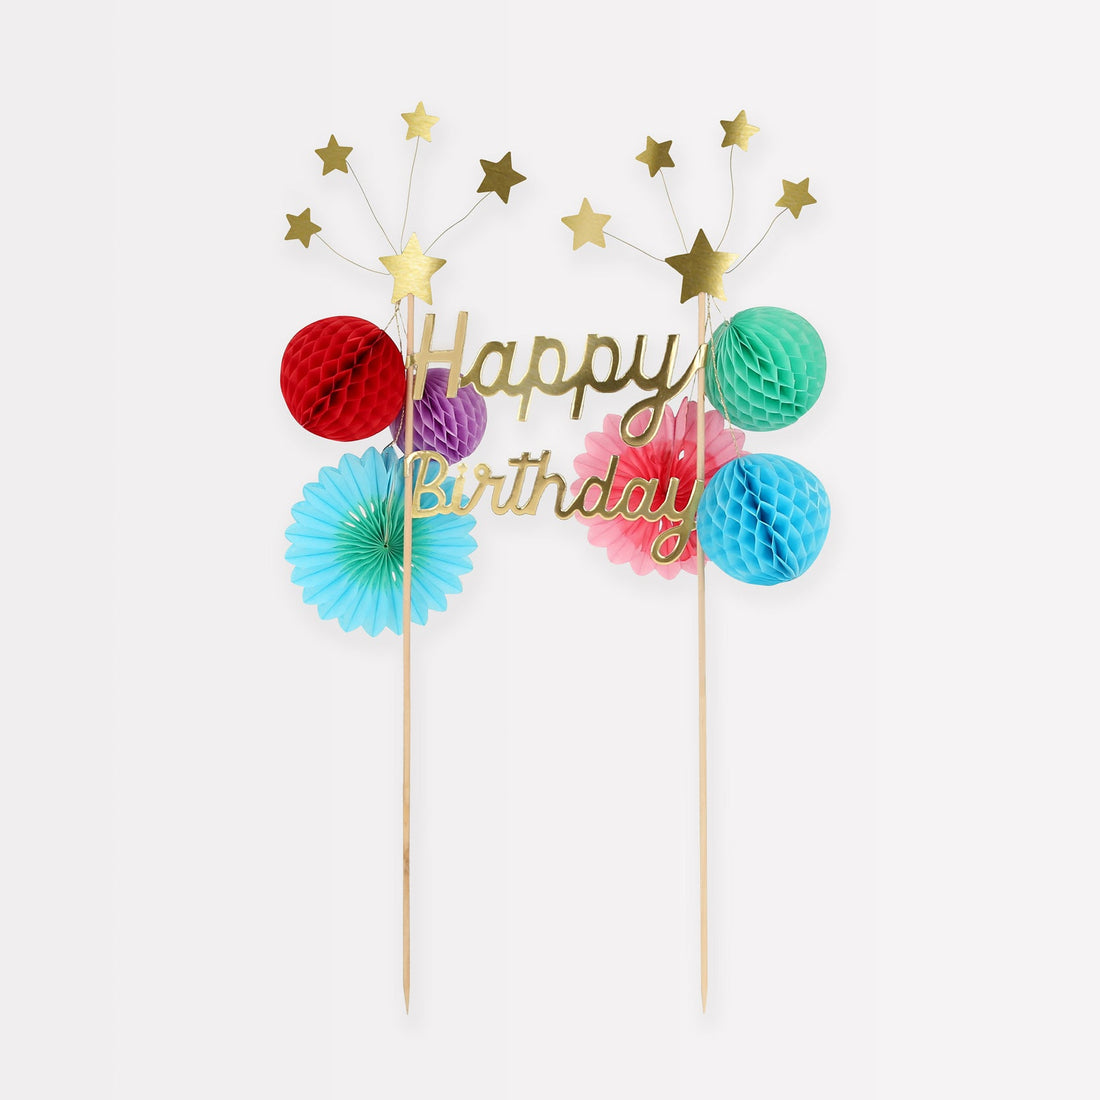 A Happy Birthday Honeycomb Cake Topper with gold foil stars and pom poms by Meri Meri.